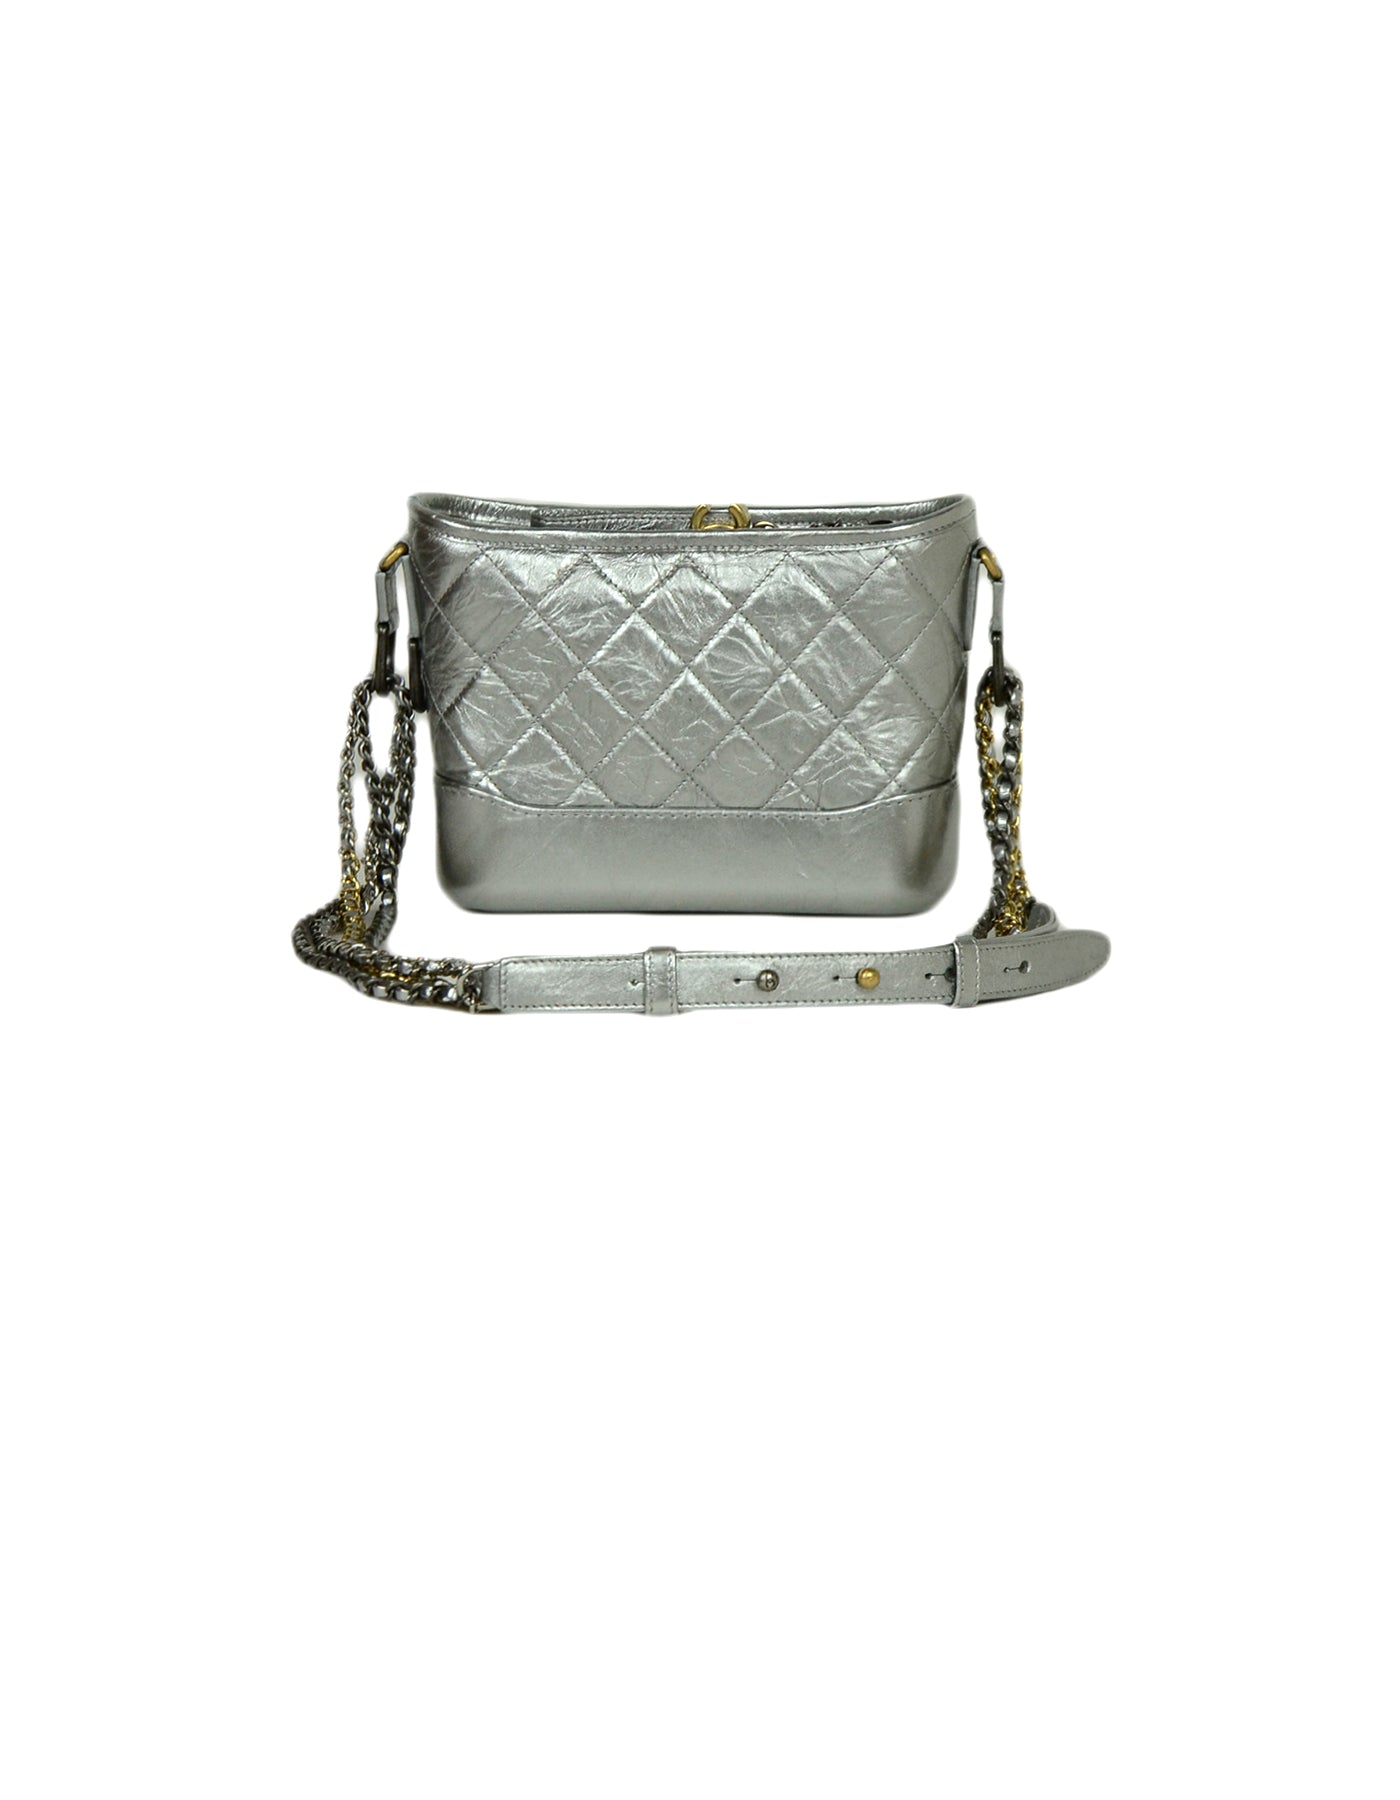 Chanel Silver Metallic Calfskin Quilted Small Gabrielle Hobo Bag